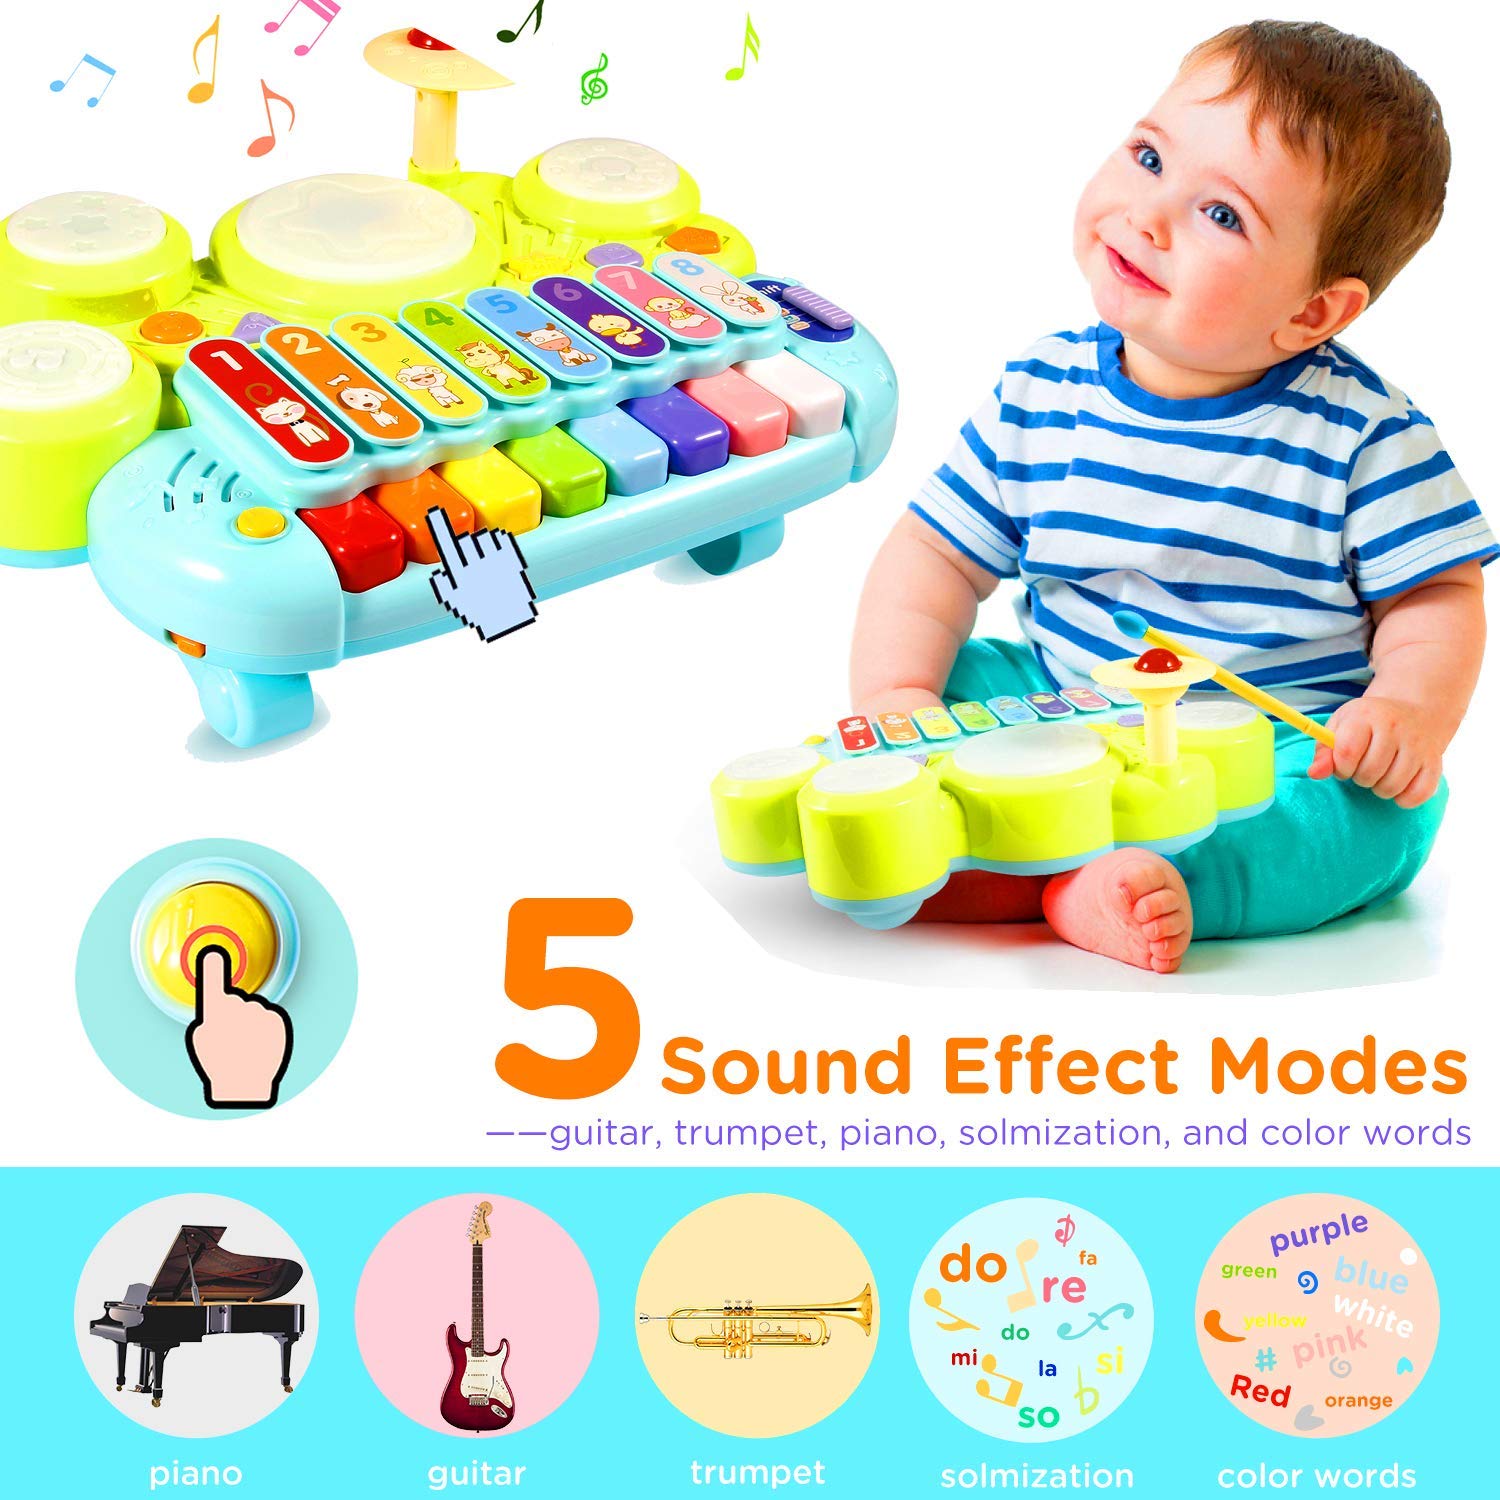 Xylophone Table Music Toys of Ohuhu, Multi-Function Toys Kids Drum Set, Discover & Play Piano Keyboard, Xylophone Set Electronic Learning Toys for Baby Infant Toddler for Kids